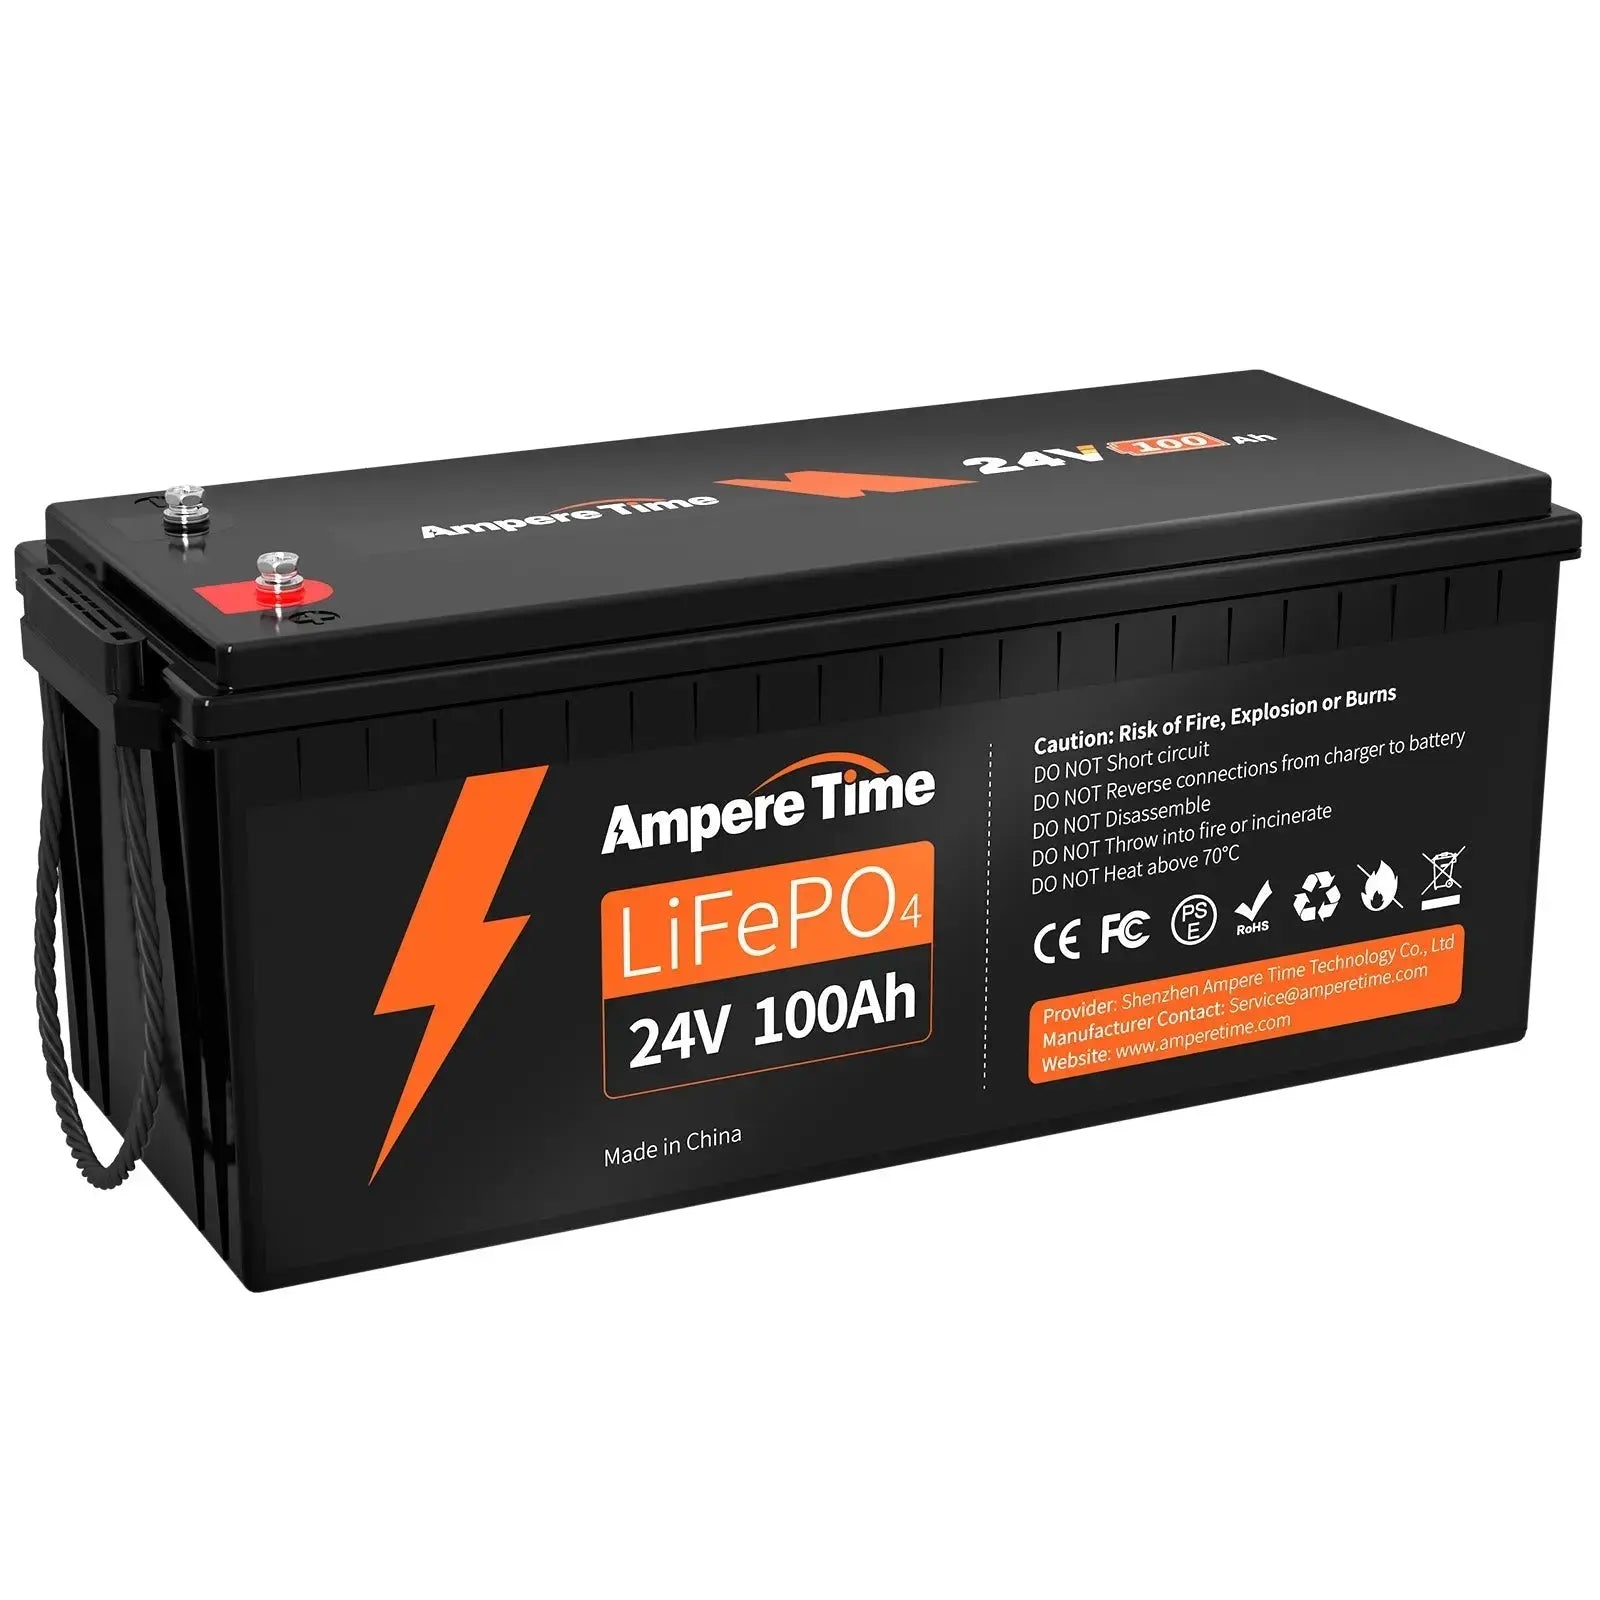 Like New] Ampere Time 24V 100Ah, 2560Wh Lithium LiFePO4 Battery